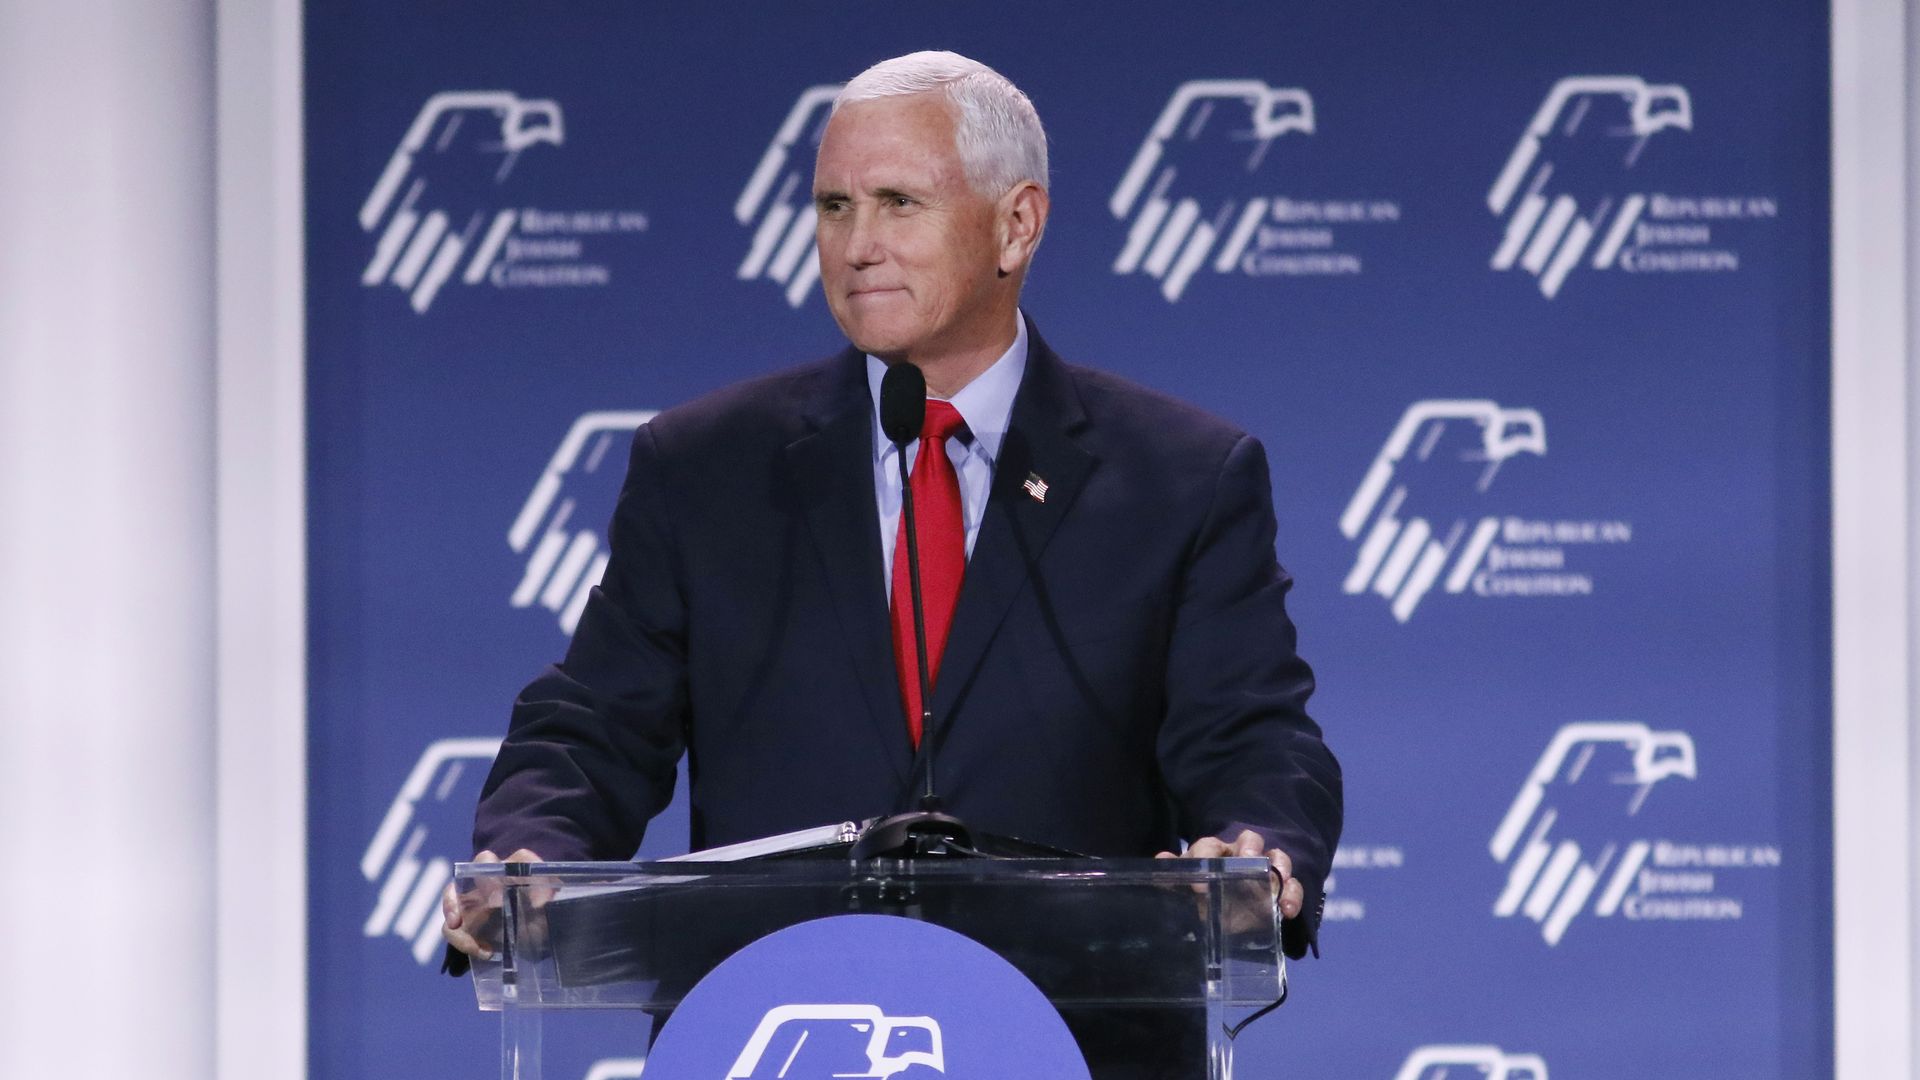 Former US Vice President Mike Pence during the Republican Jewish Coalition (RJC) Annual Leadership Meeting in Las Vegas, Nevada, US, on Friday, Nov. 18, 2022